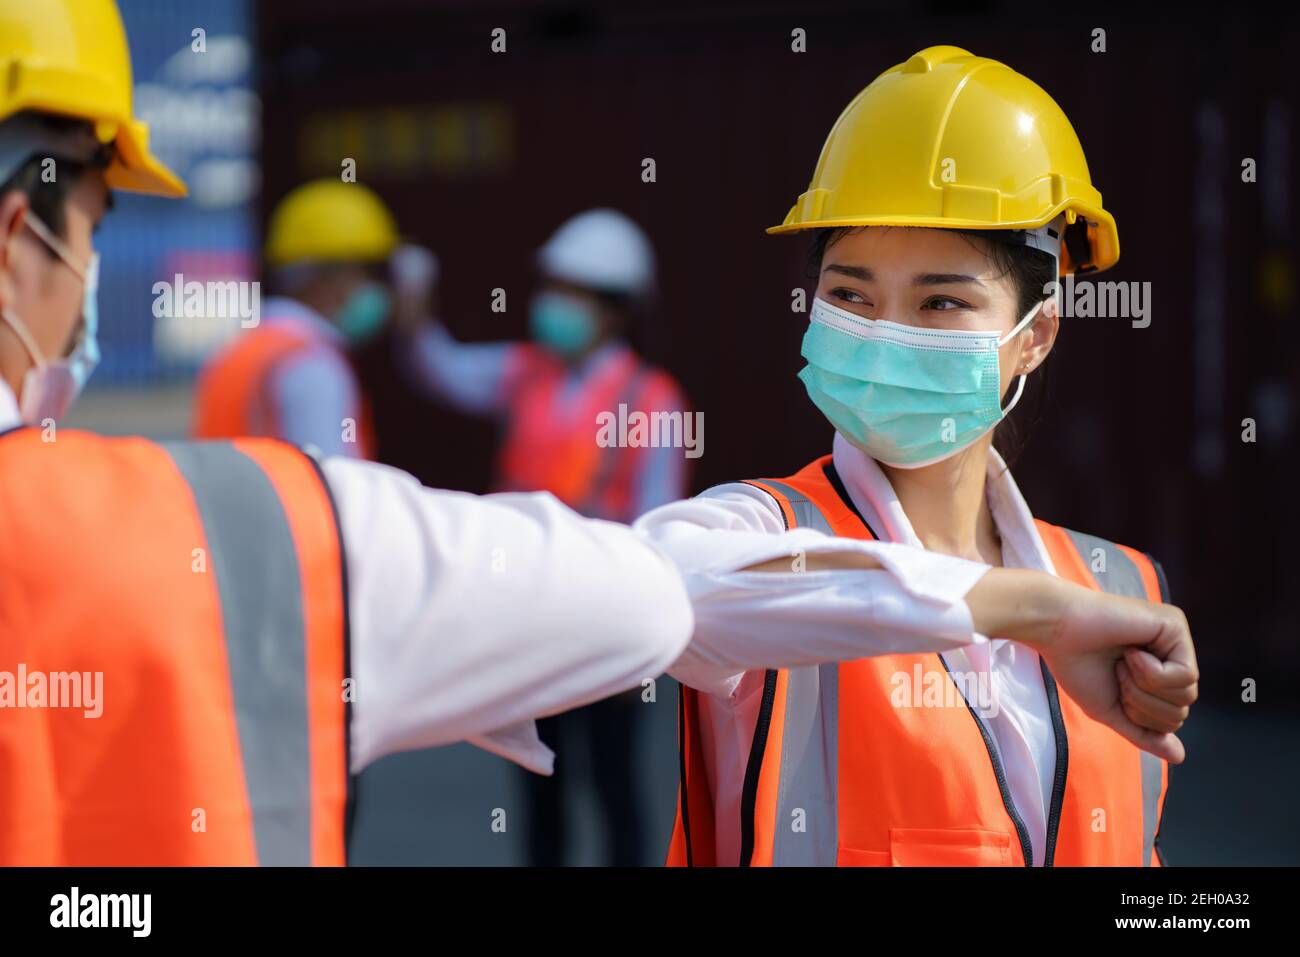 Asian worker new normal greeting by elbows bump wear safety helmet and mask in container depot terminal for prevent coronavirus and social distancing Stock Photo